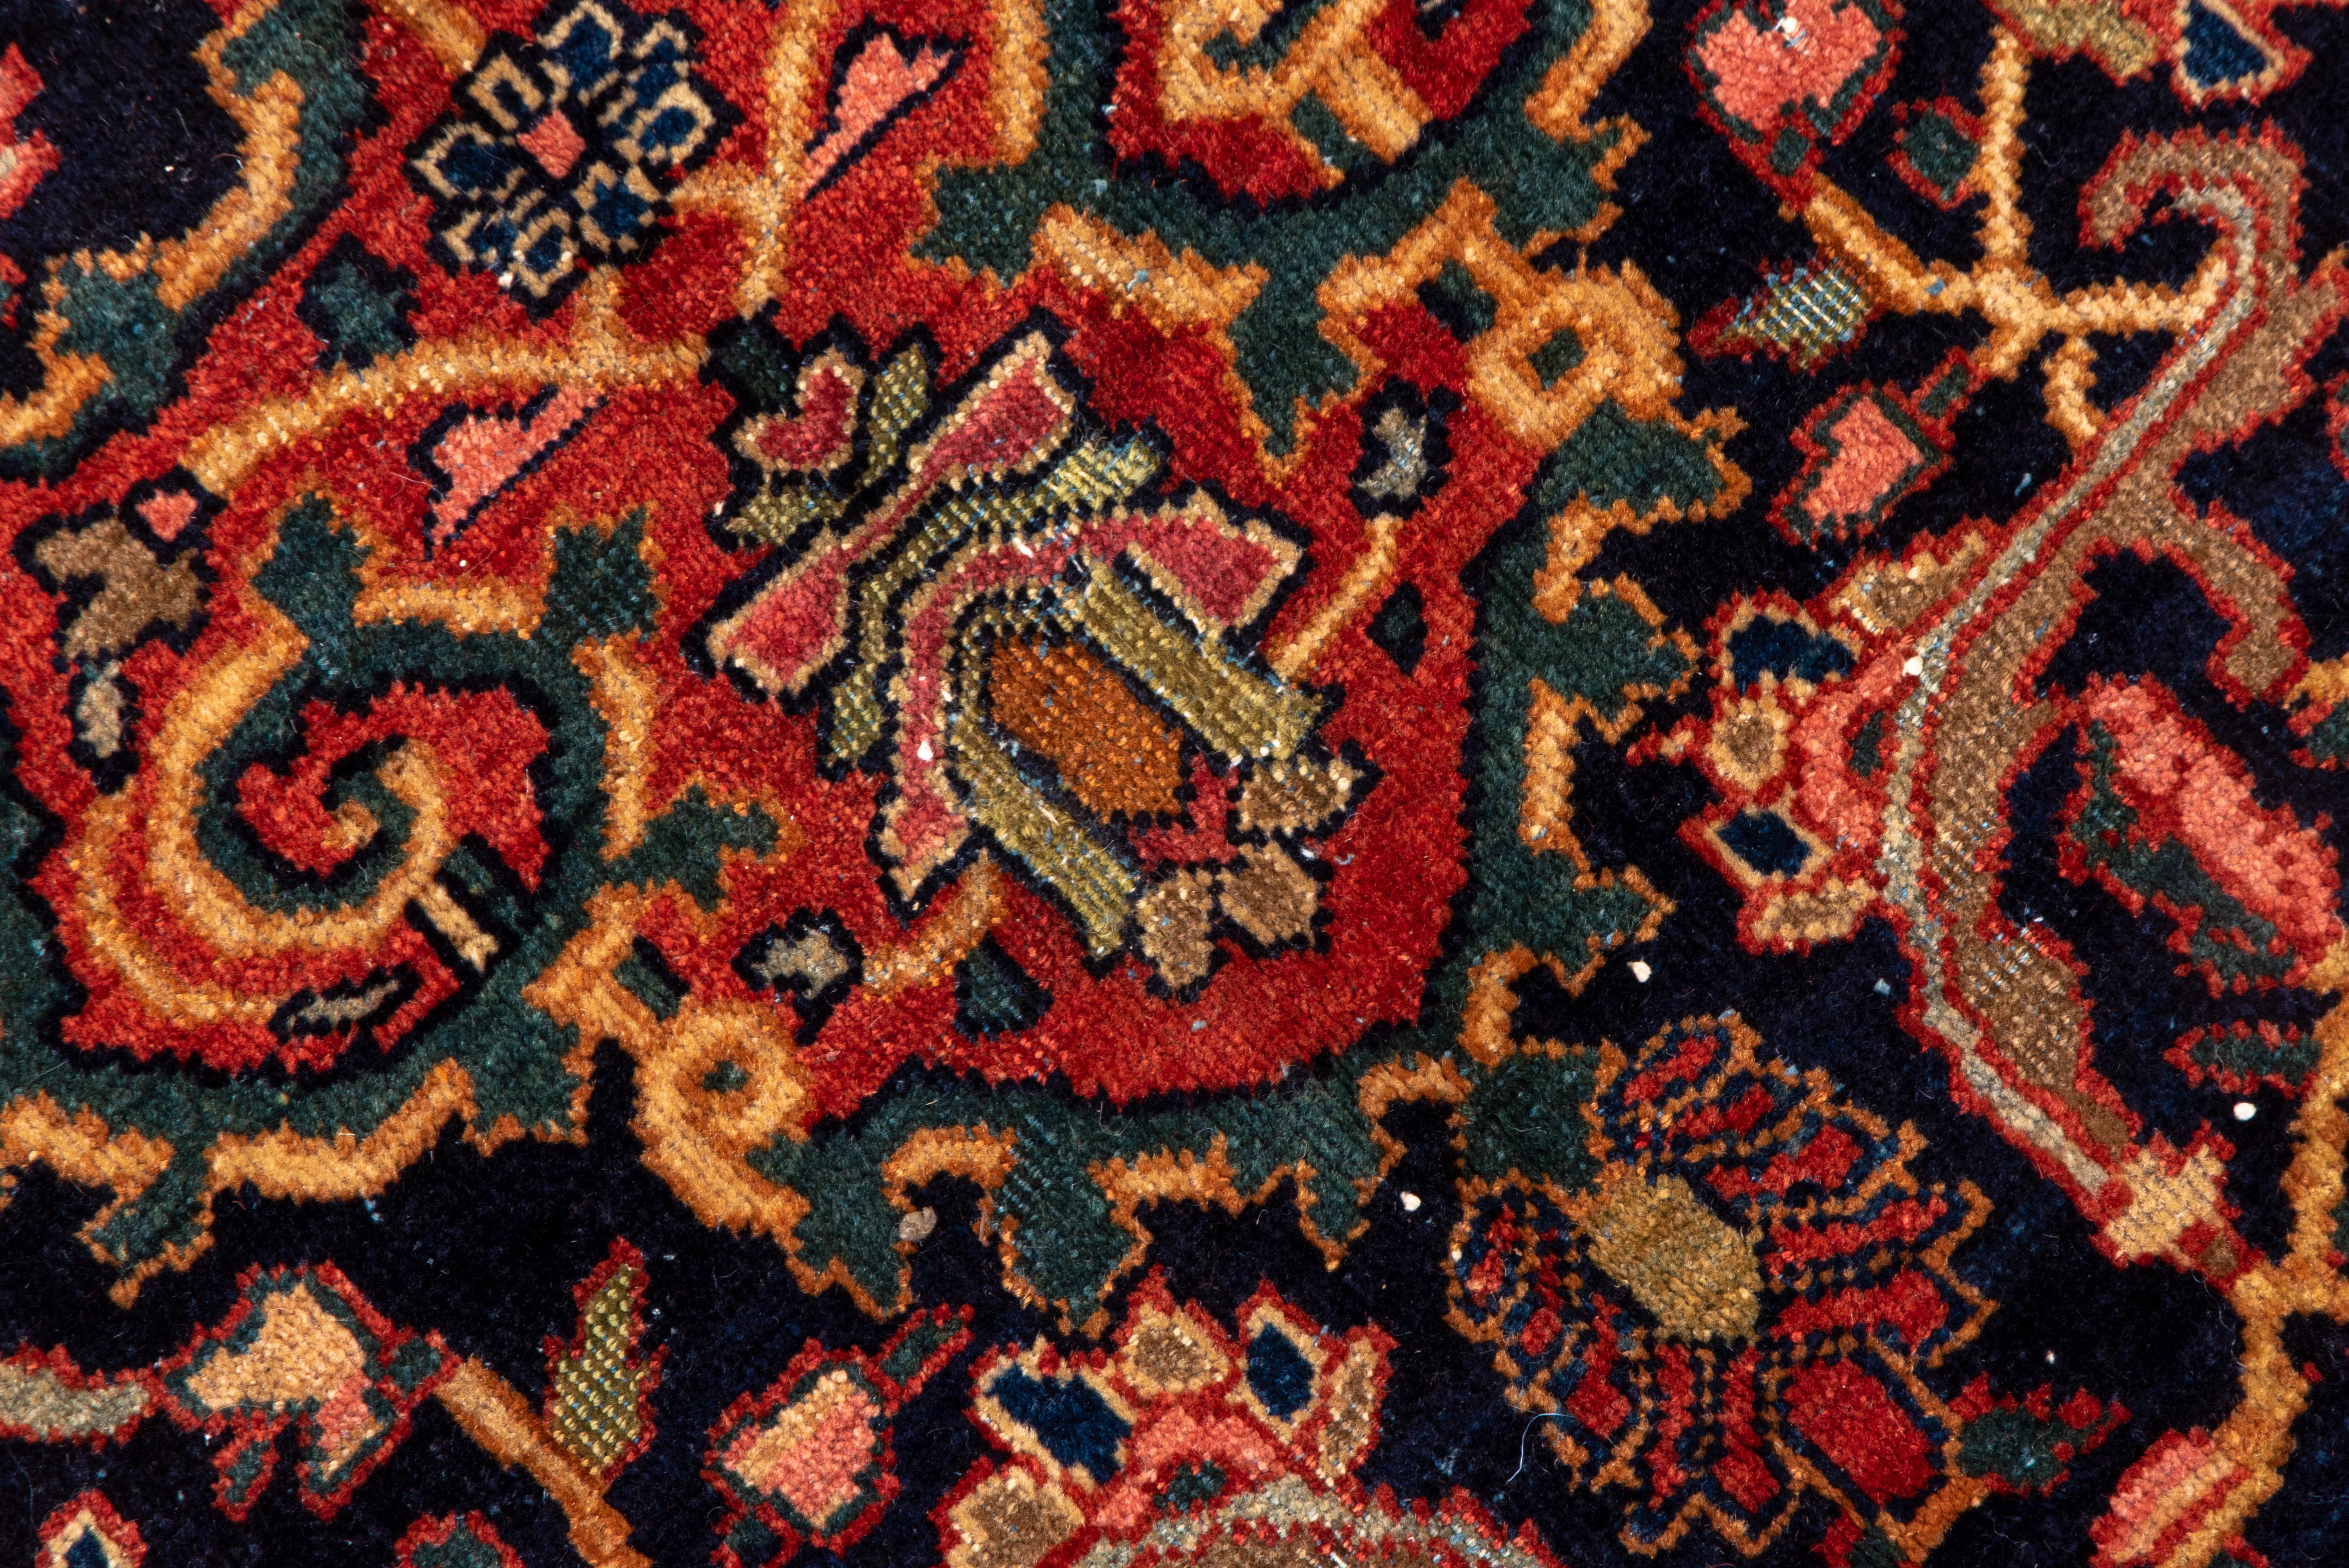 Early 20th Century Antique Colorful Persian Sarouk Farahan Carpet, Colorful Palette